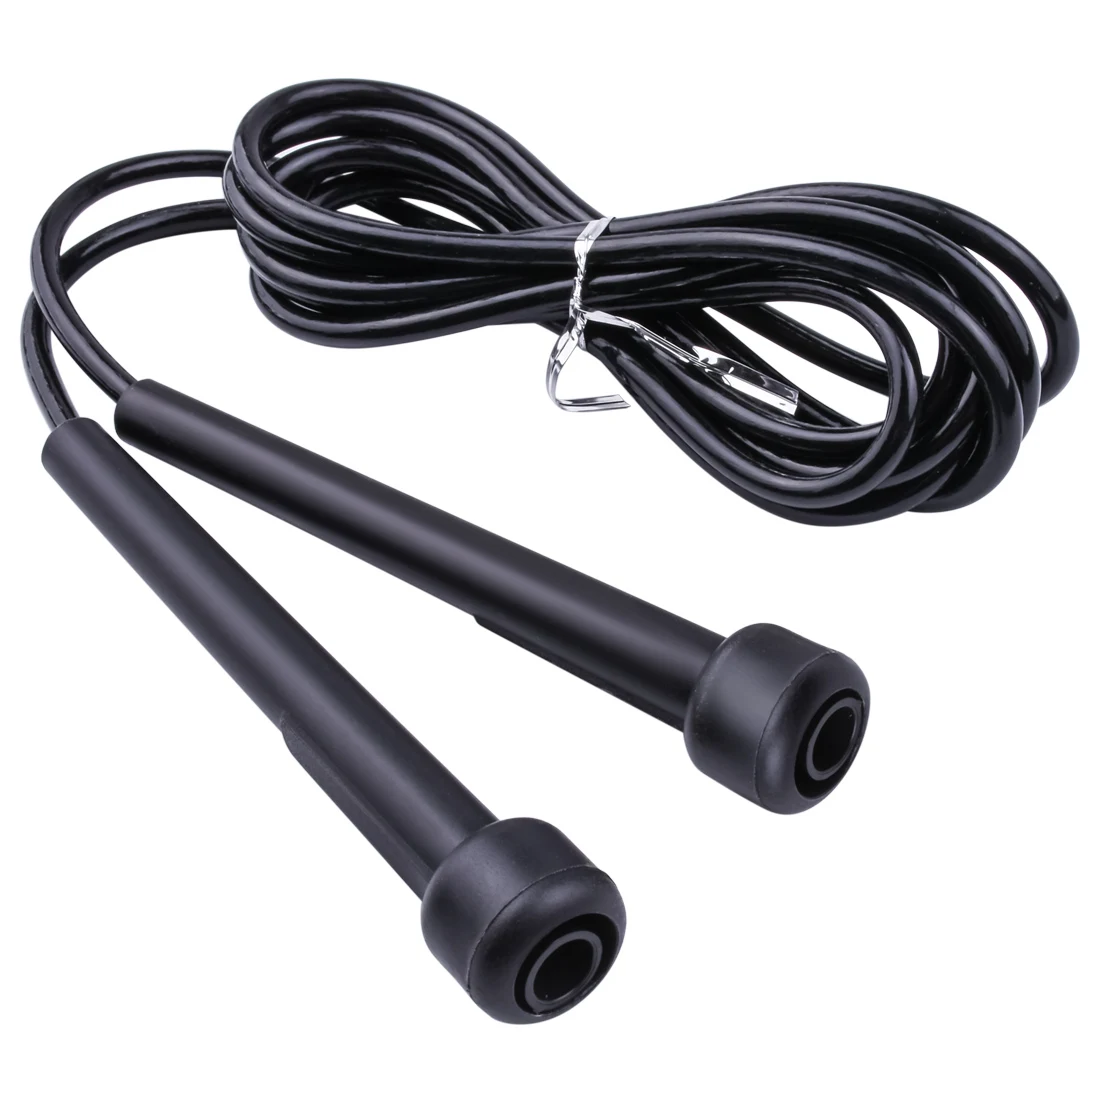 Ire jump rope boxing speed skipping workout fitness kids adults sport exercise training thumb200